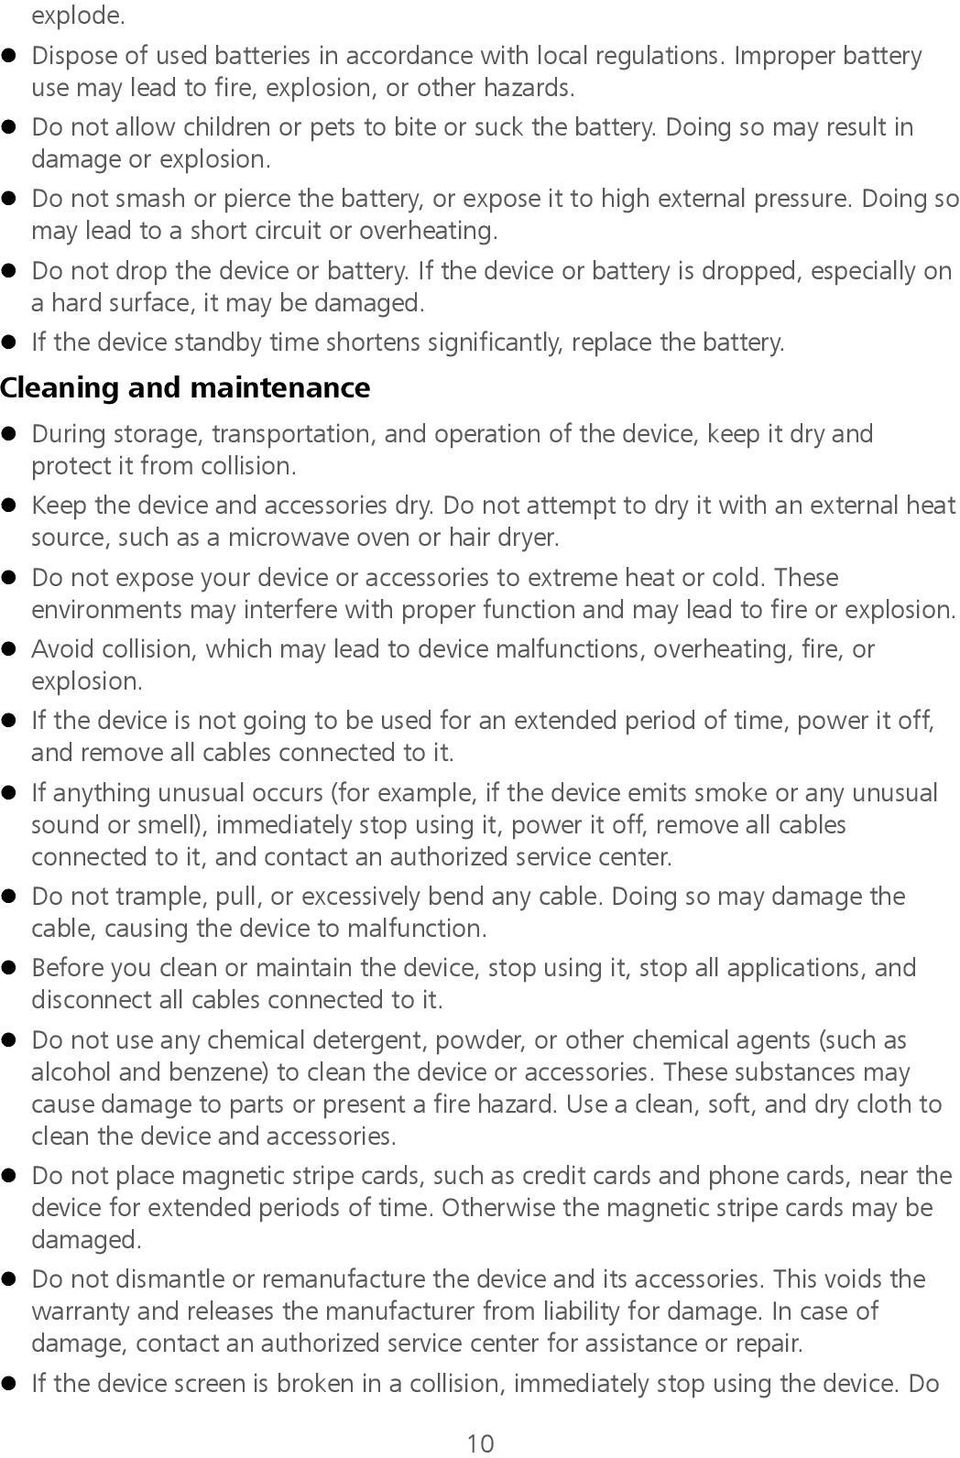 Do not drop the device or battery. If the device or battery is dropped, especially on a hard surface, it may be damaged. If the device standby time shortens significantly, replace the battery.